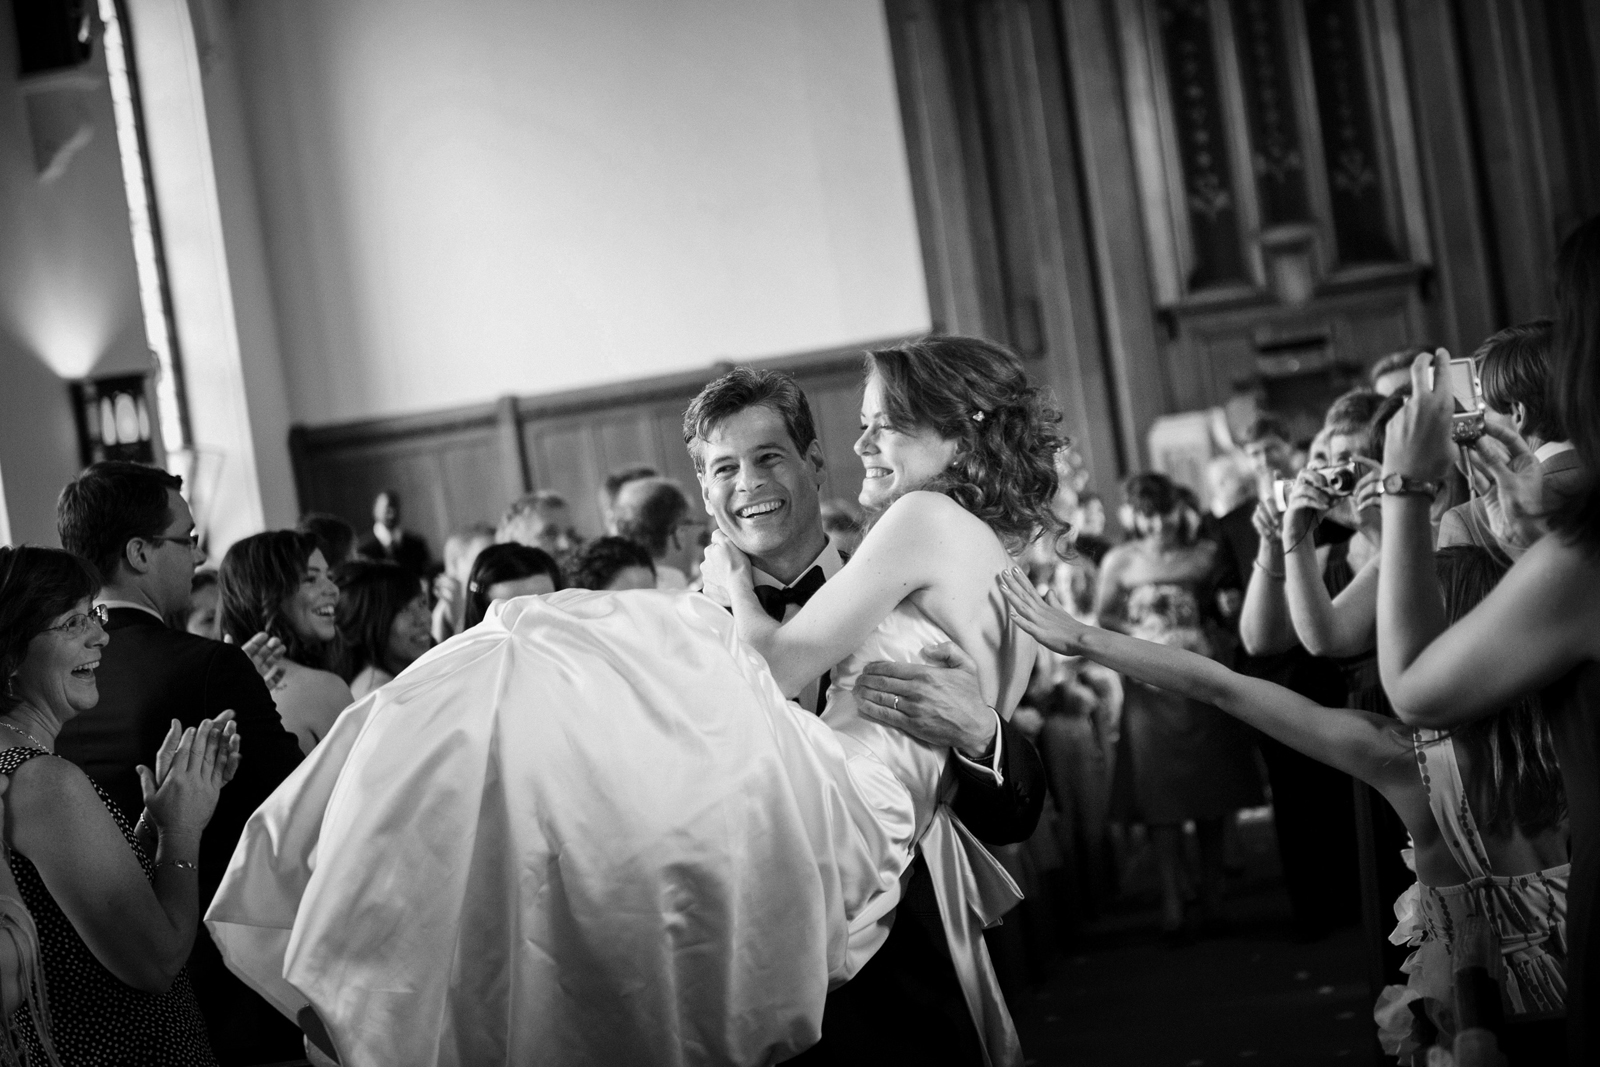 Groom carrying bride down aisle and a guest's hand reaches out to touch her from the crowd